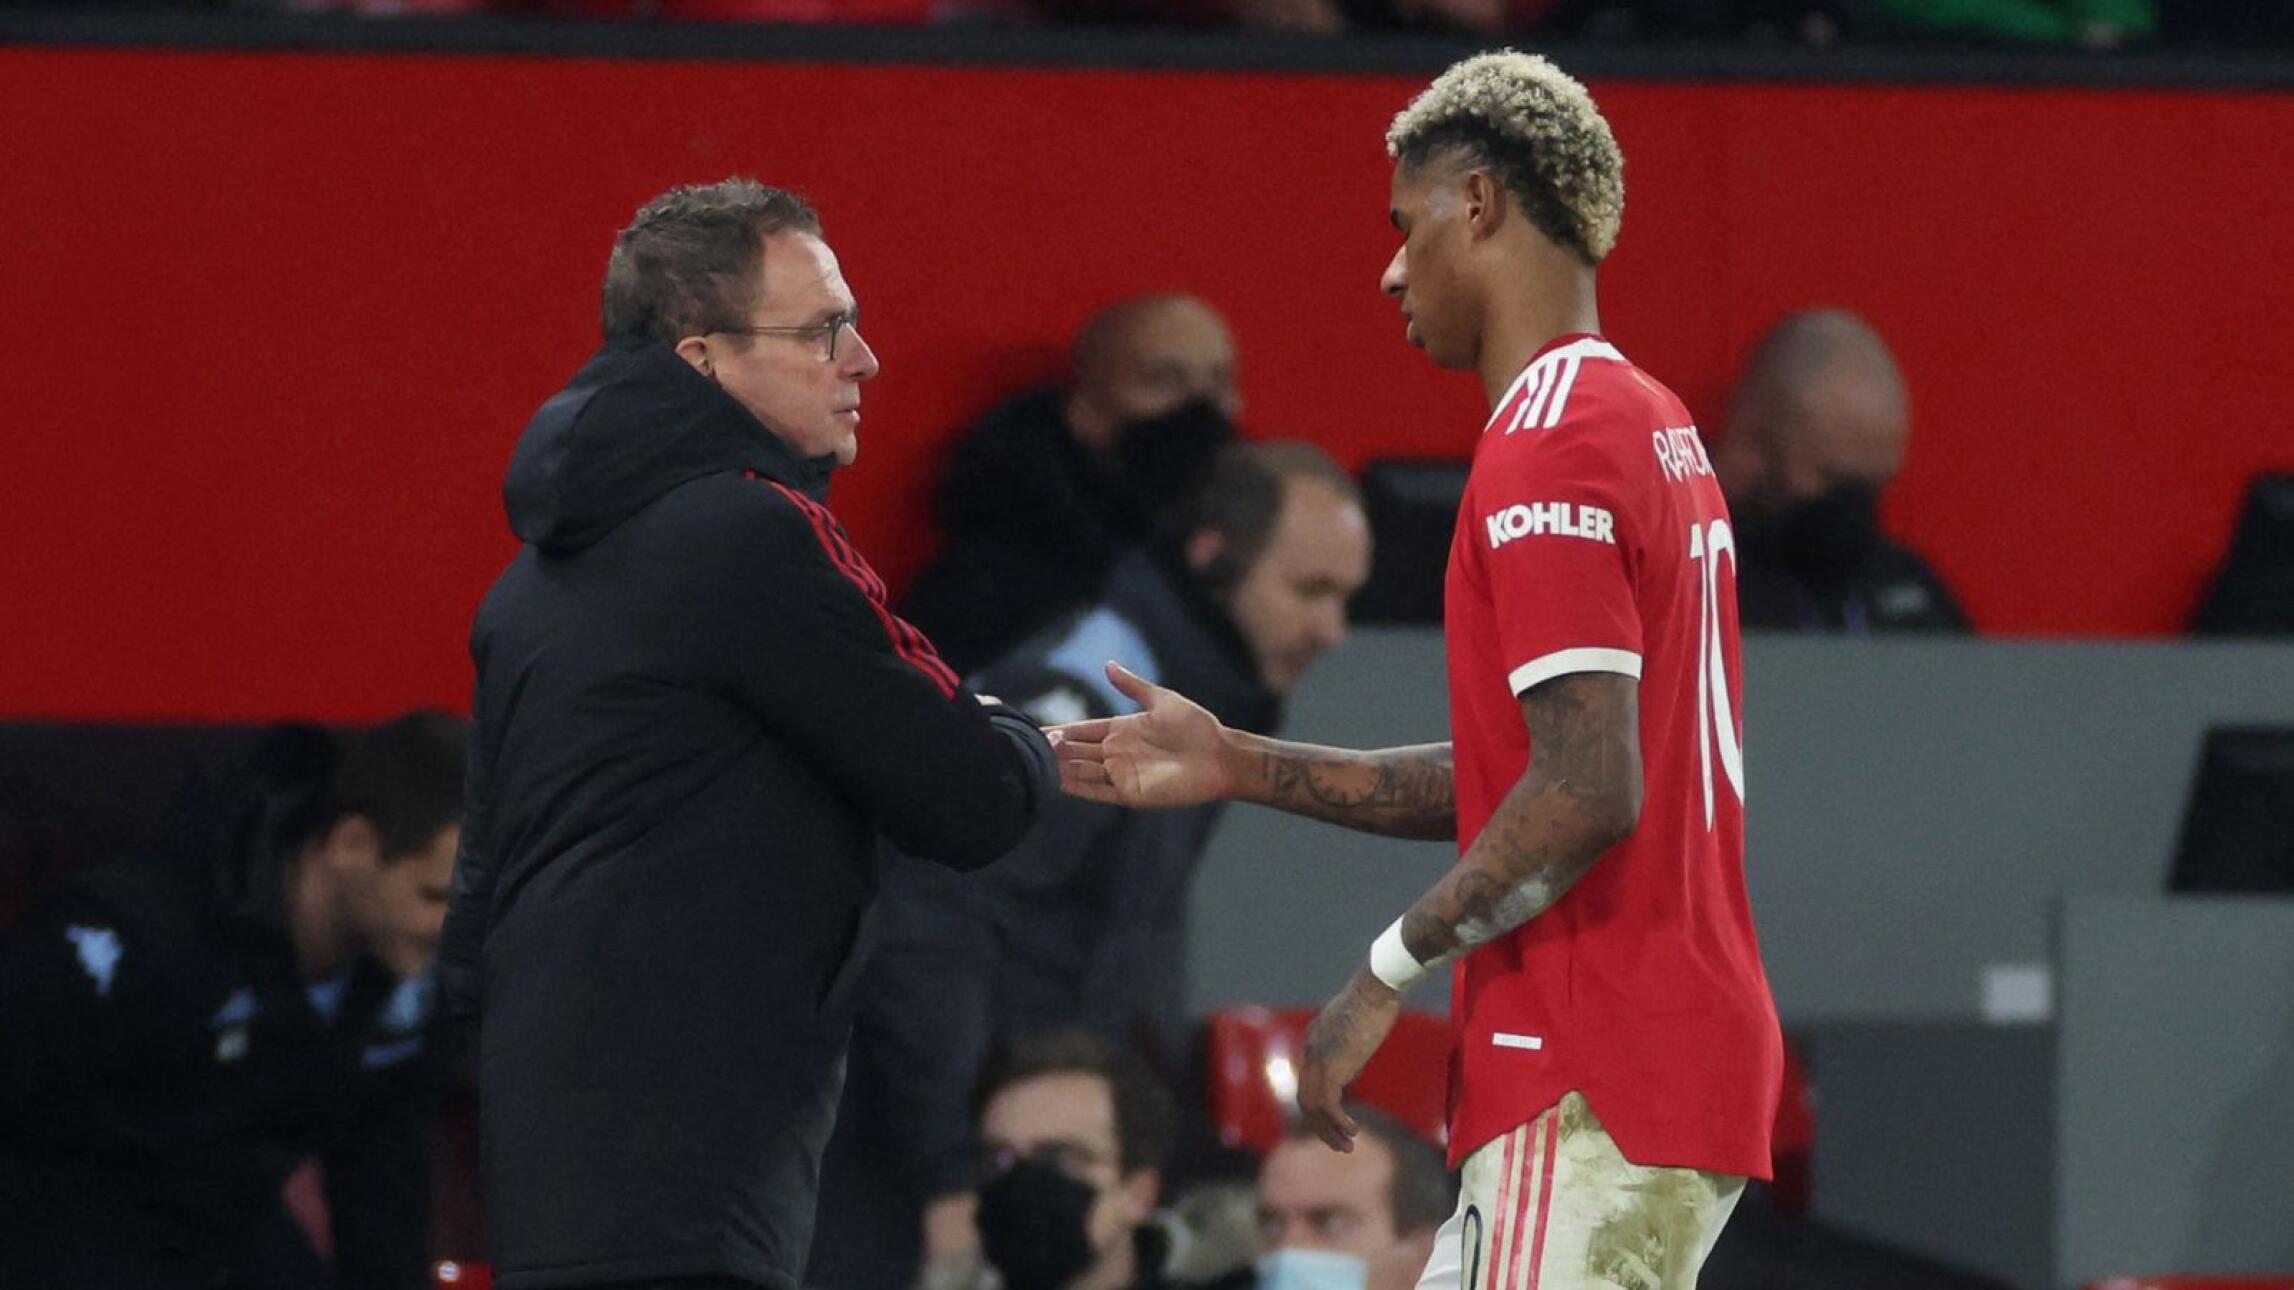 Manchester United's Marcus Rashford is substituted as manager Ralf Rangnick looks on during their FA Cup third round clash against Aston Villa on Monday